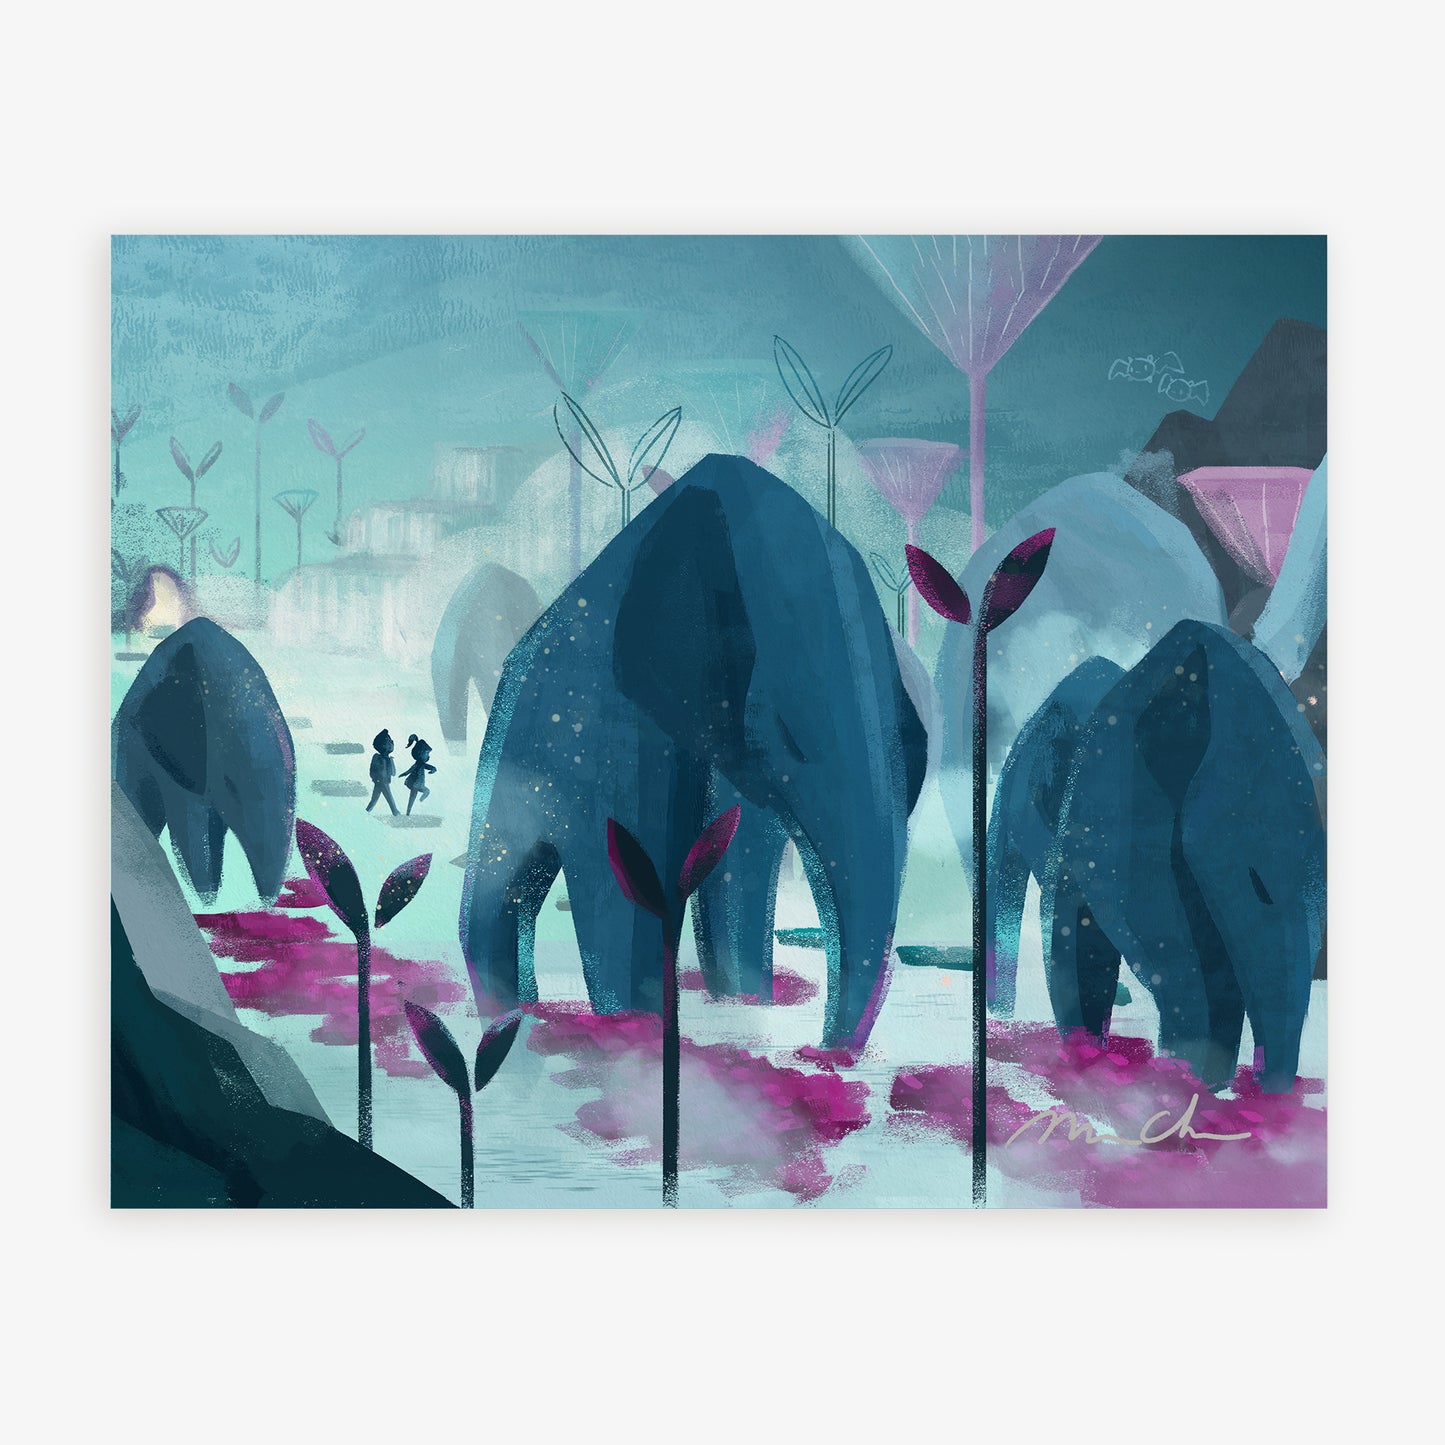 Roam with Giants | Signed Art Print